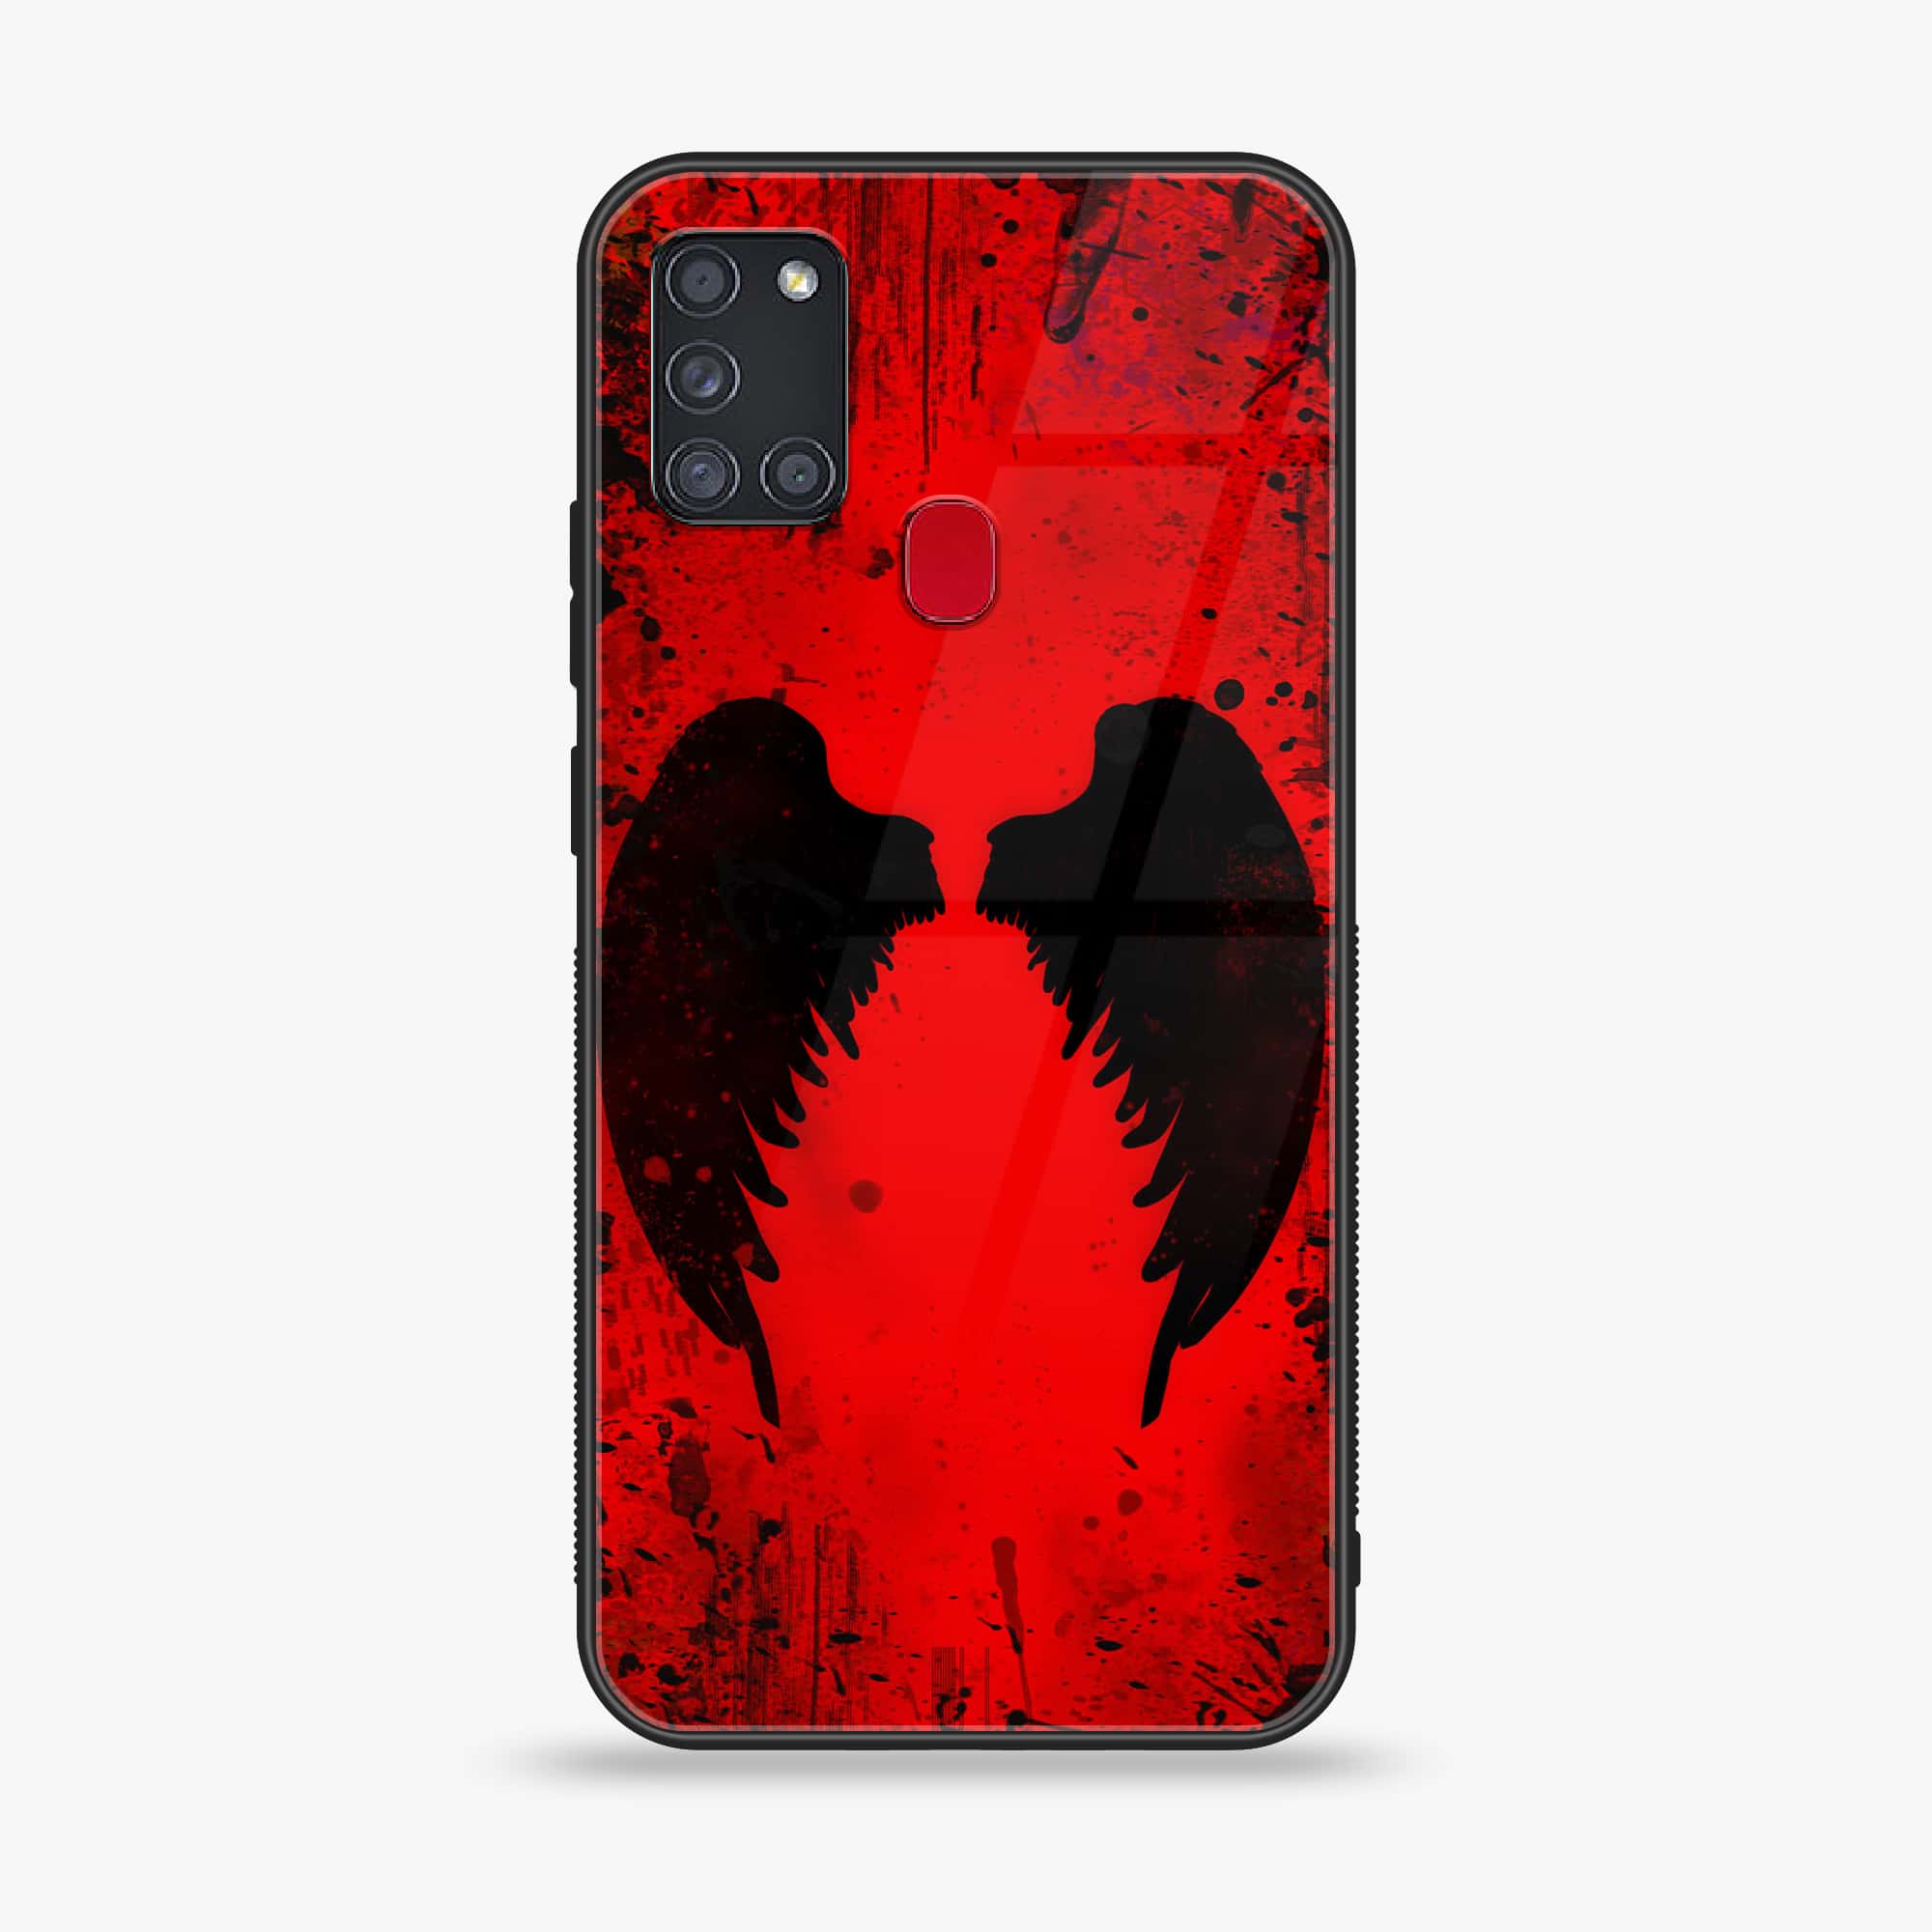 Samsung Galaxy A21s - Angel Wings 2.0 Series - Premium Printed Glass soft Bumper shock Proof Case